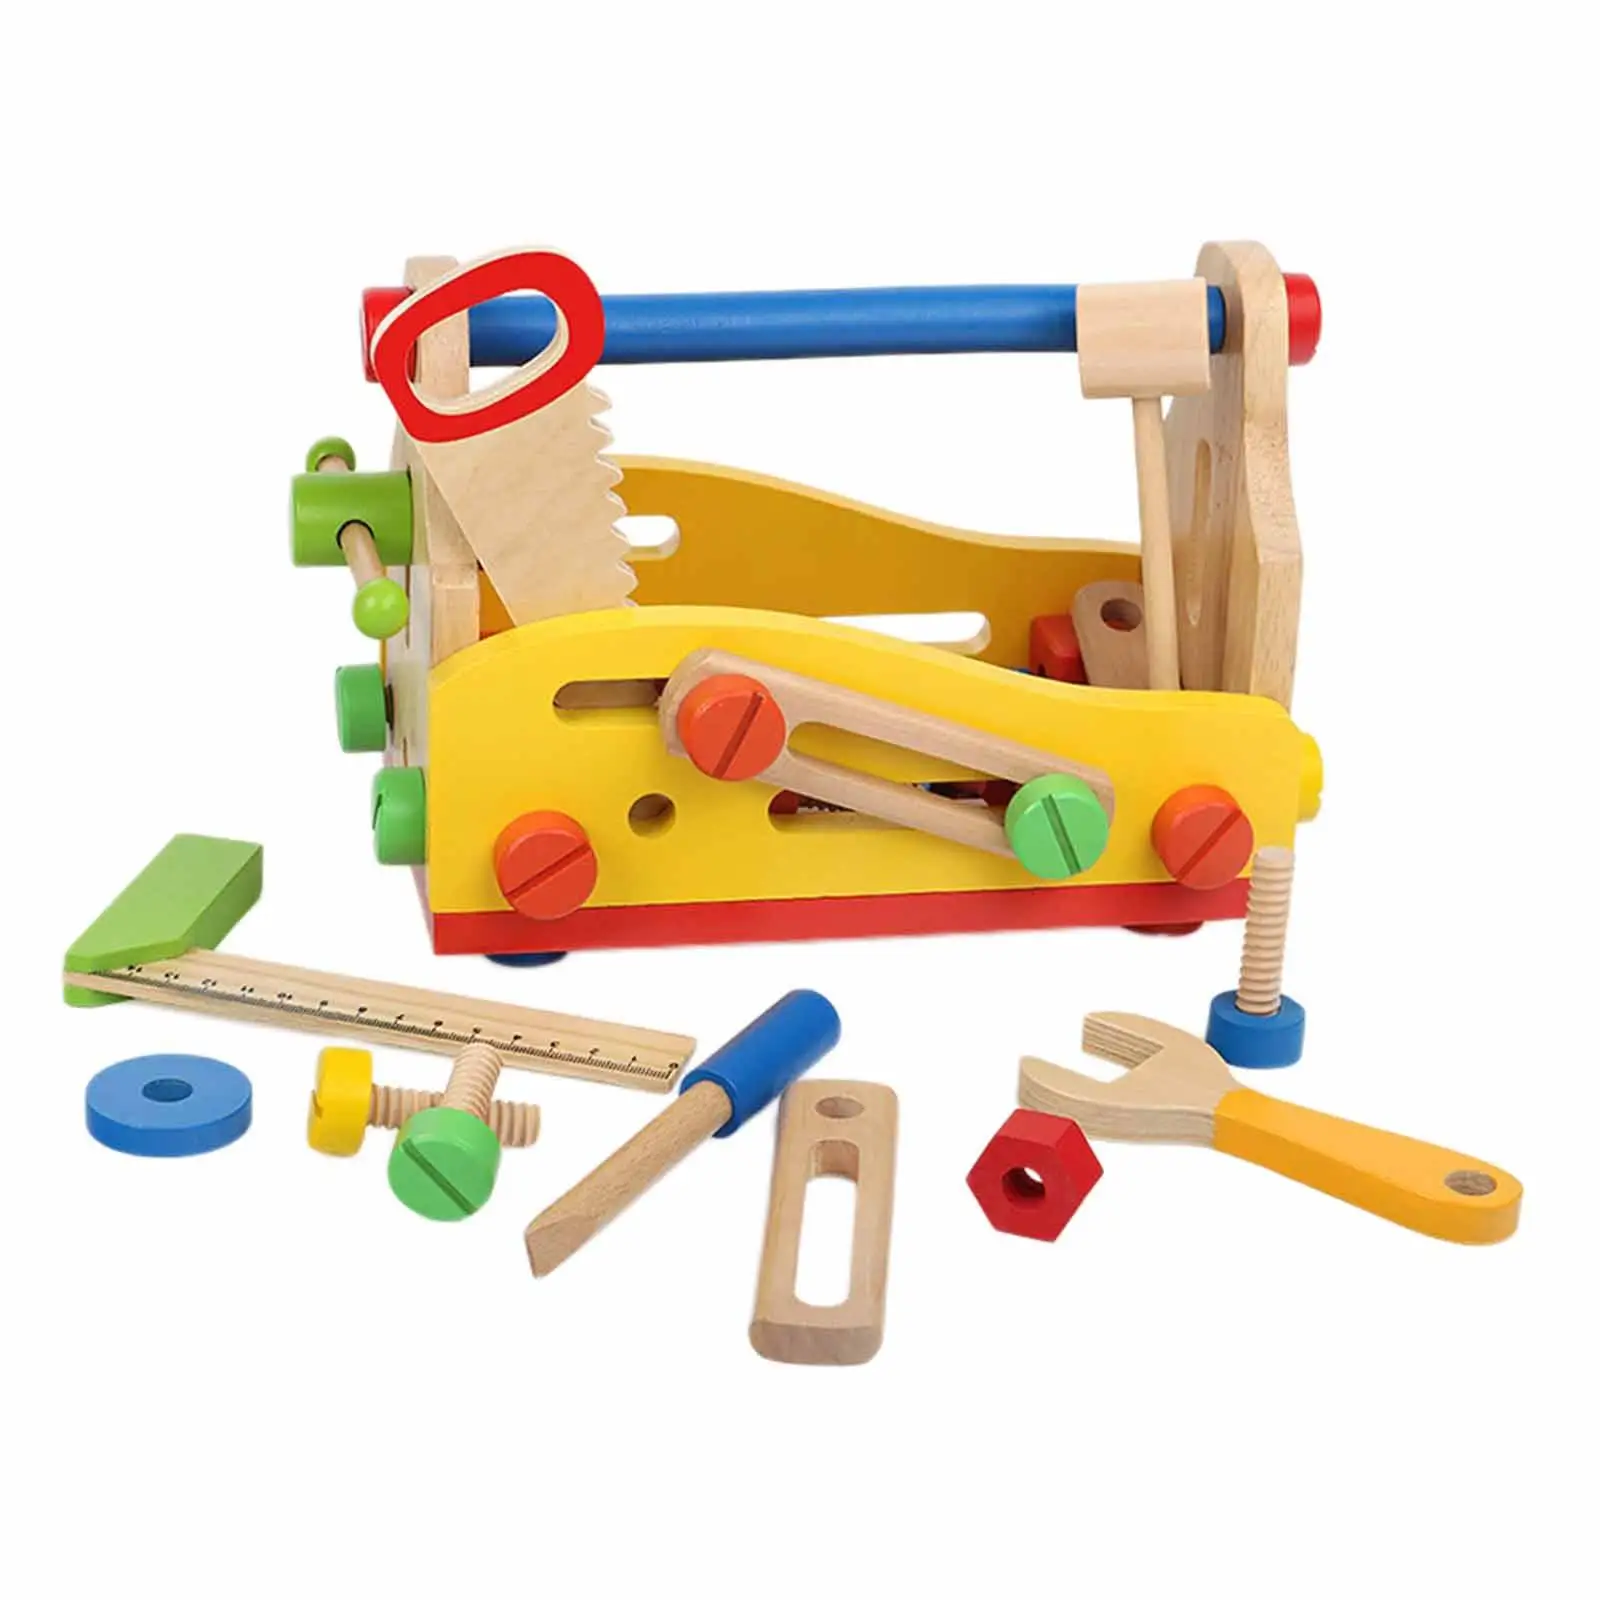 Montessori Wooden Tool Toy Educational Learning Toy Screw Disassembly Toys Play Tool for Children Toddler Kids